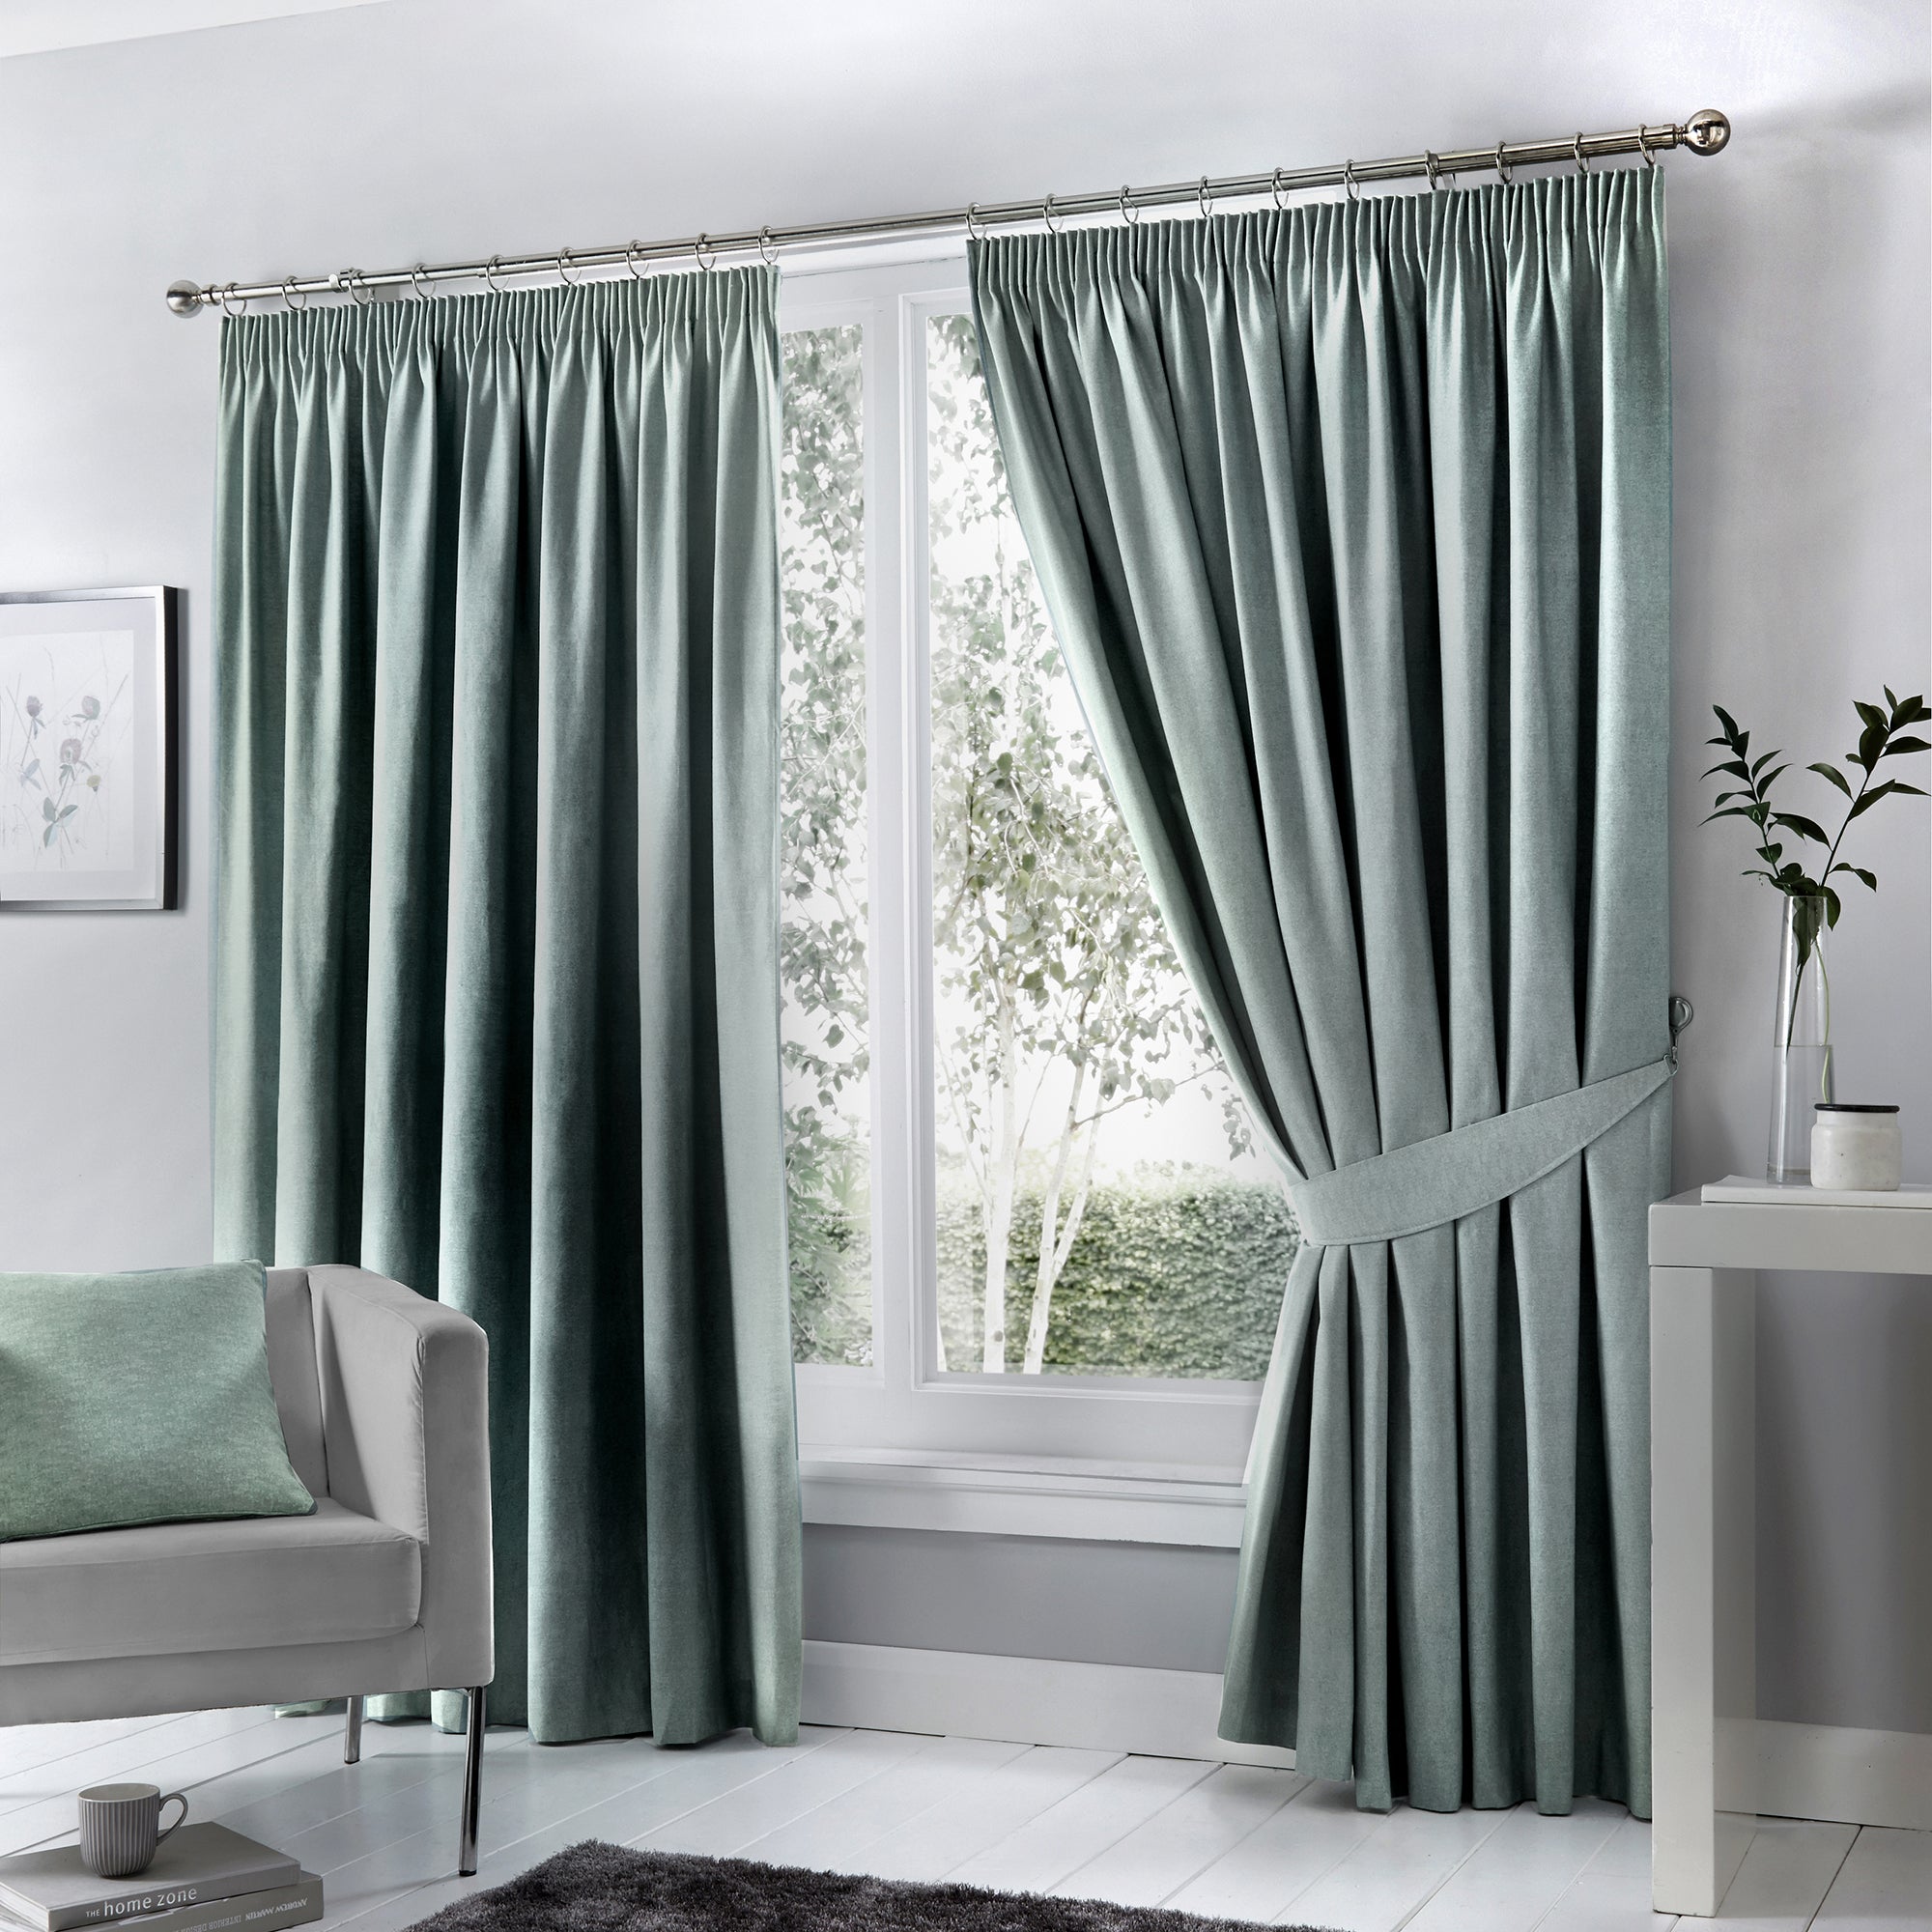 Dijon - Blackout Pair of Pencil Pleat Curtains in Duck Egg - by Fusion